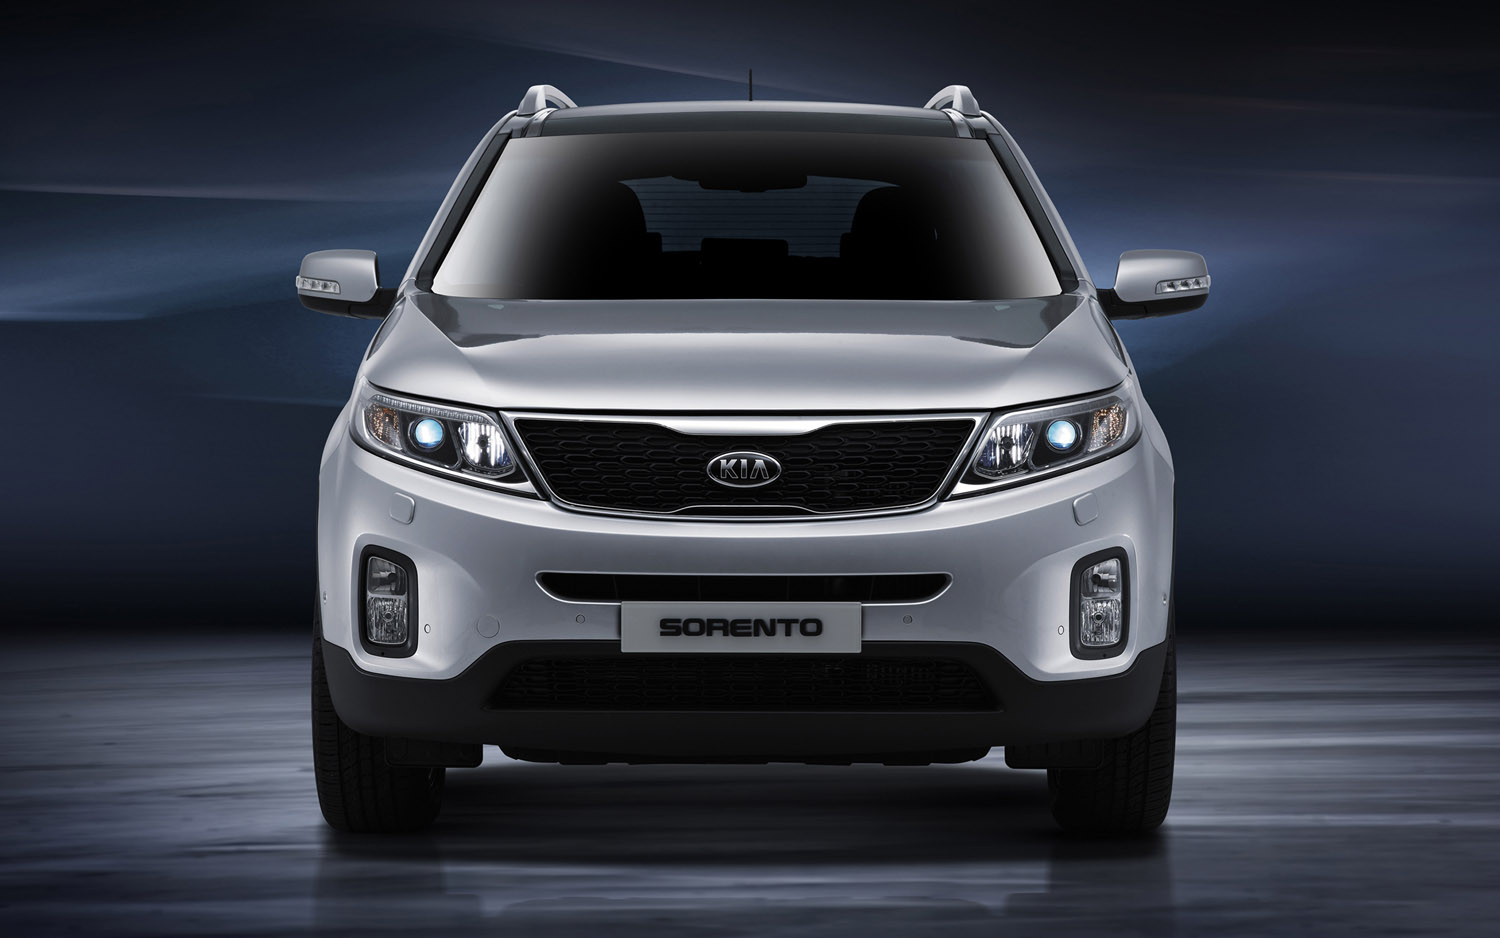 Refreshed 2013 Kia Sorento Previewed for European Buyers - WOT on ...